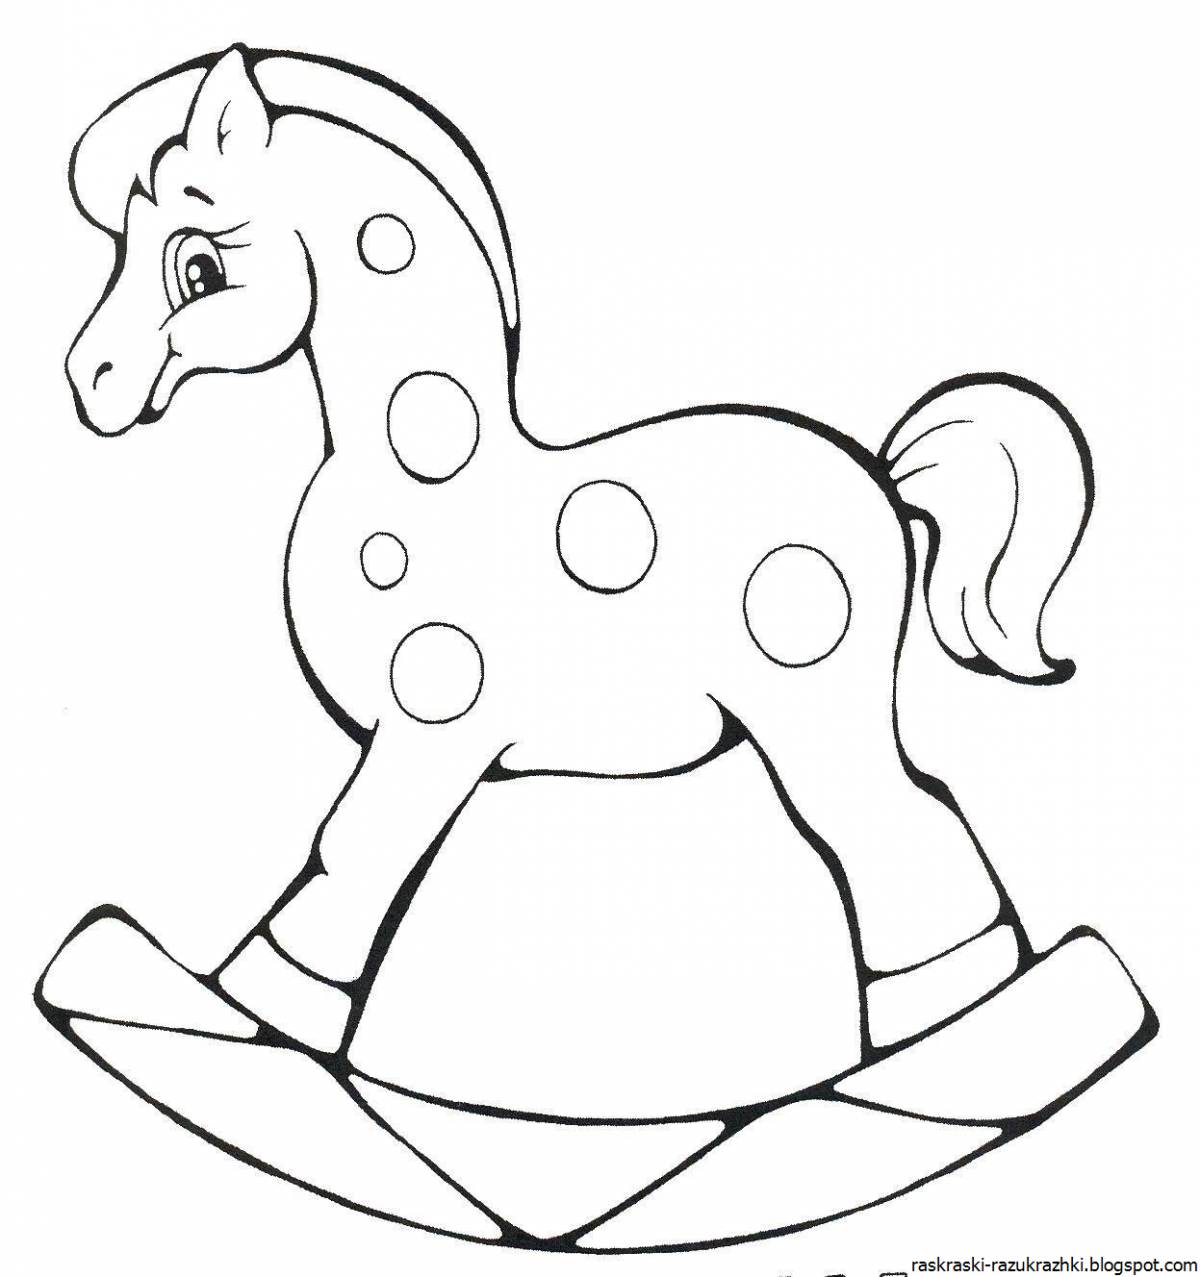 Energetic horse coloring for kids